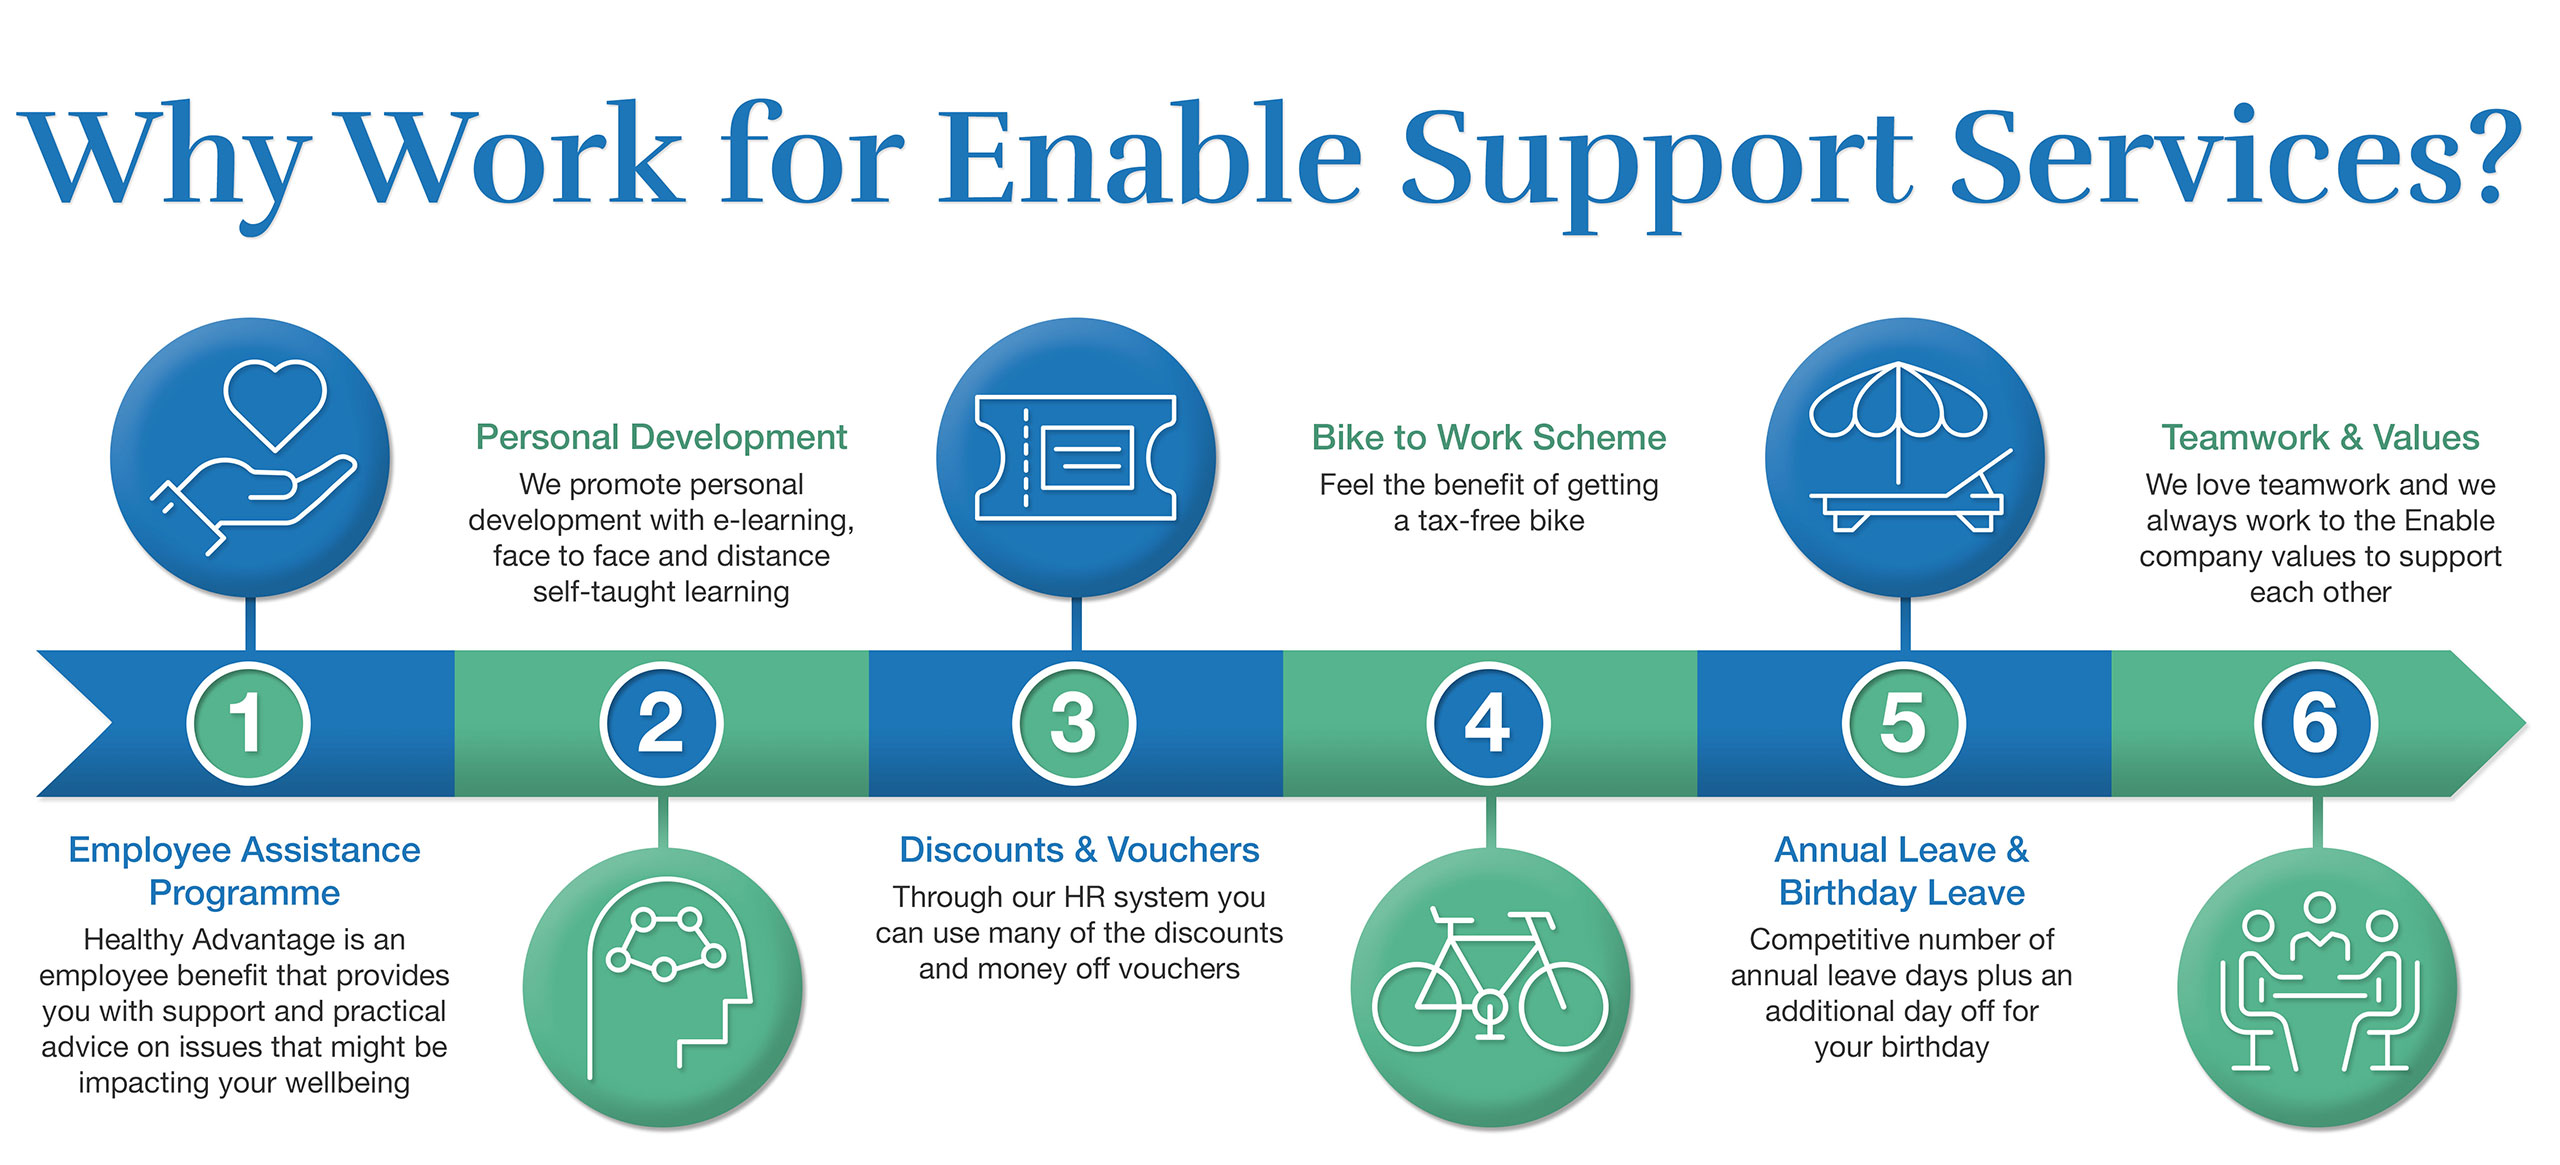 Why Work for Enable Support Services